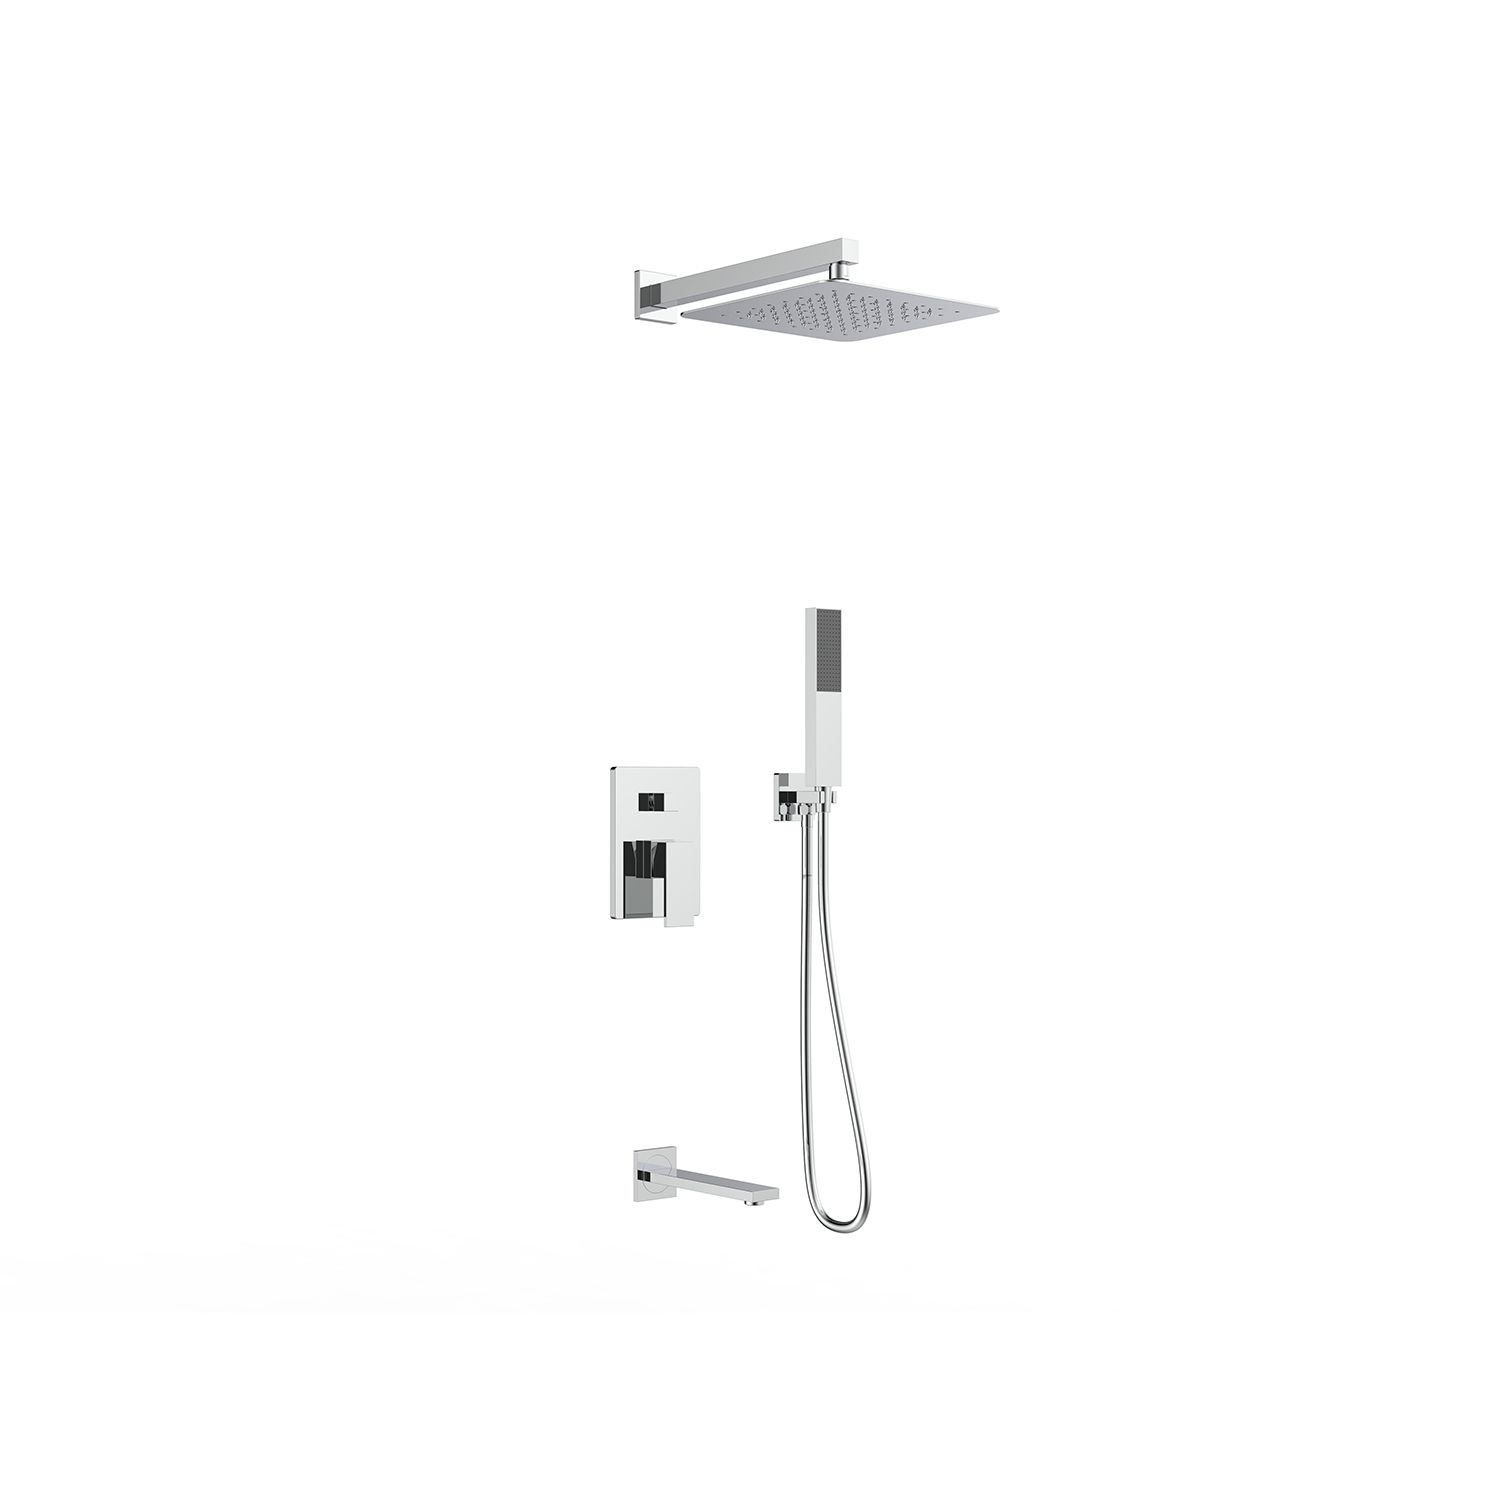 DAX Square 3 Way Shower System with Hand Shower Chrome Finish (DAX-6563A-CR)